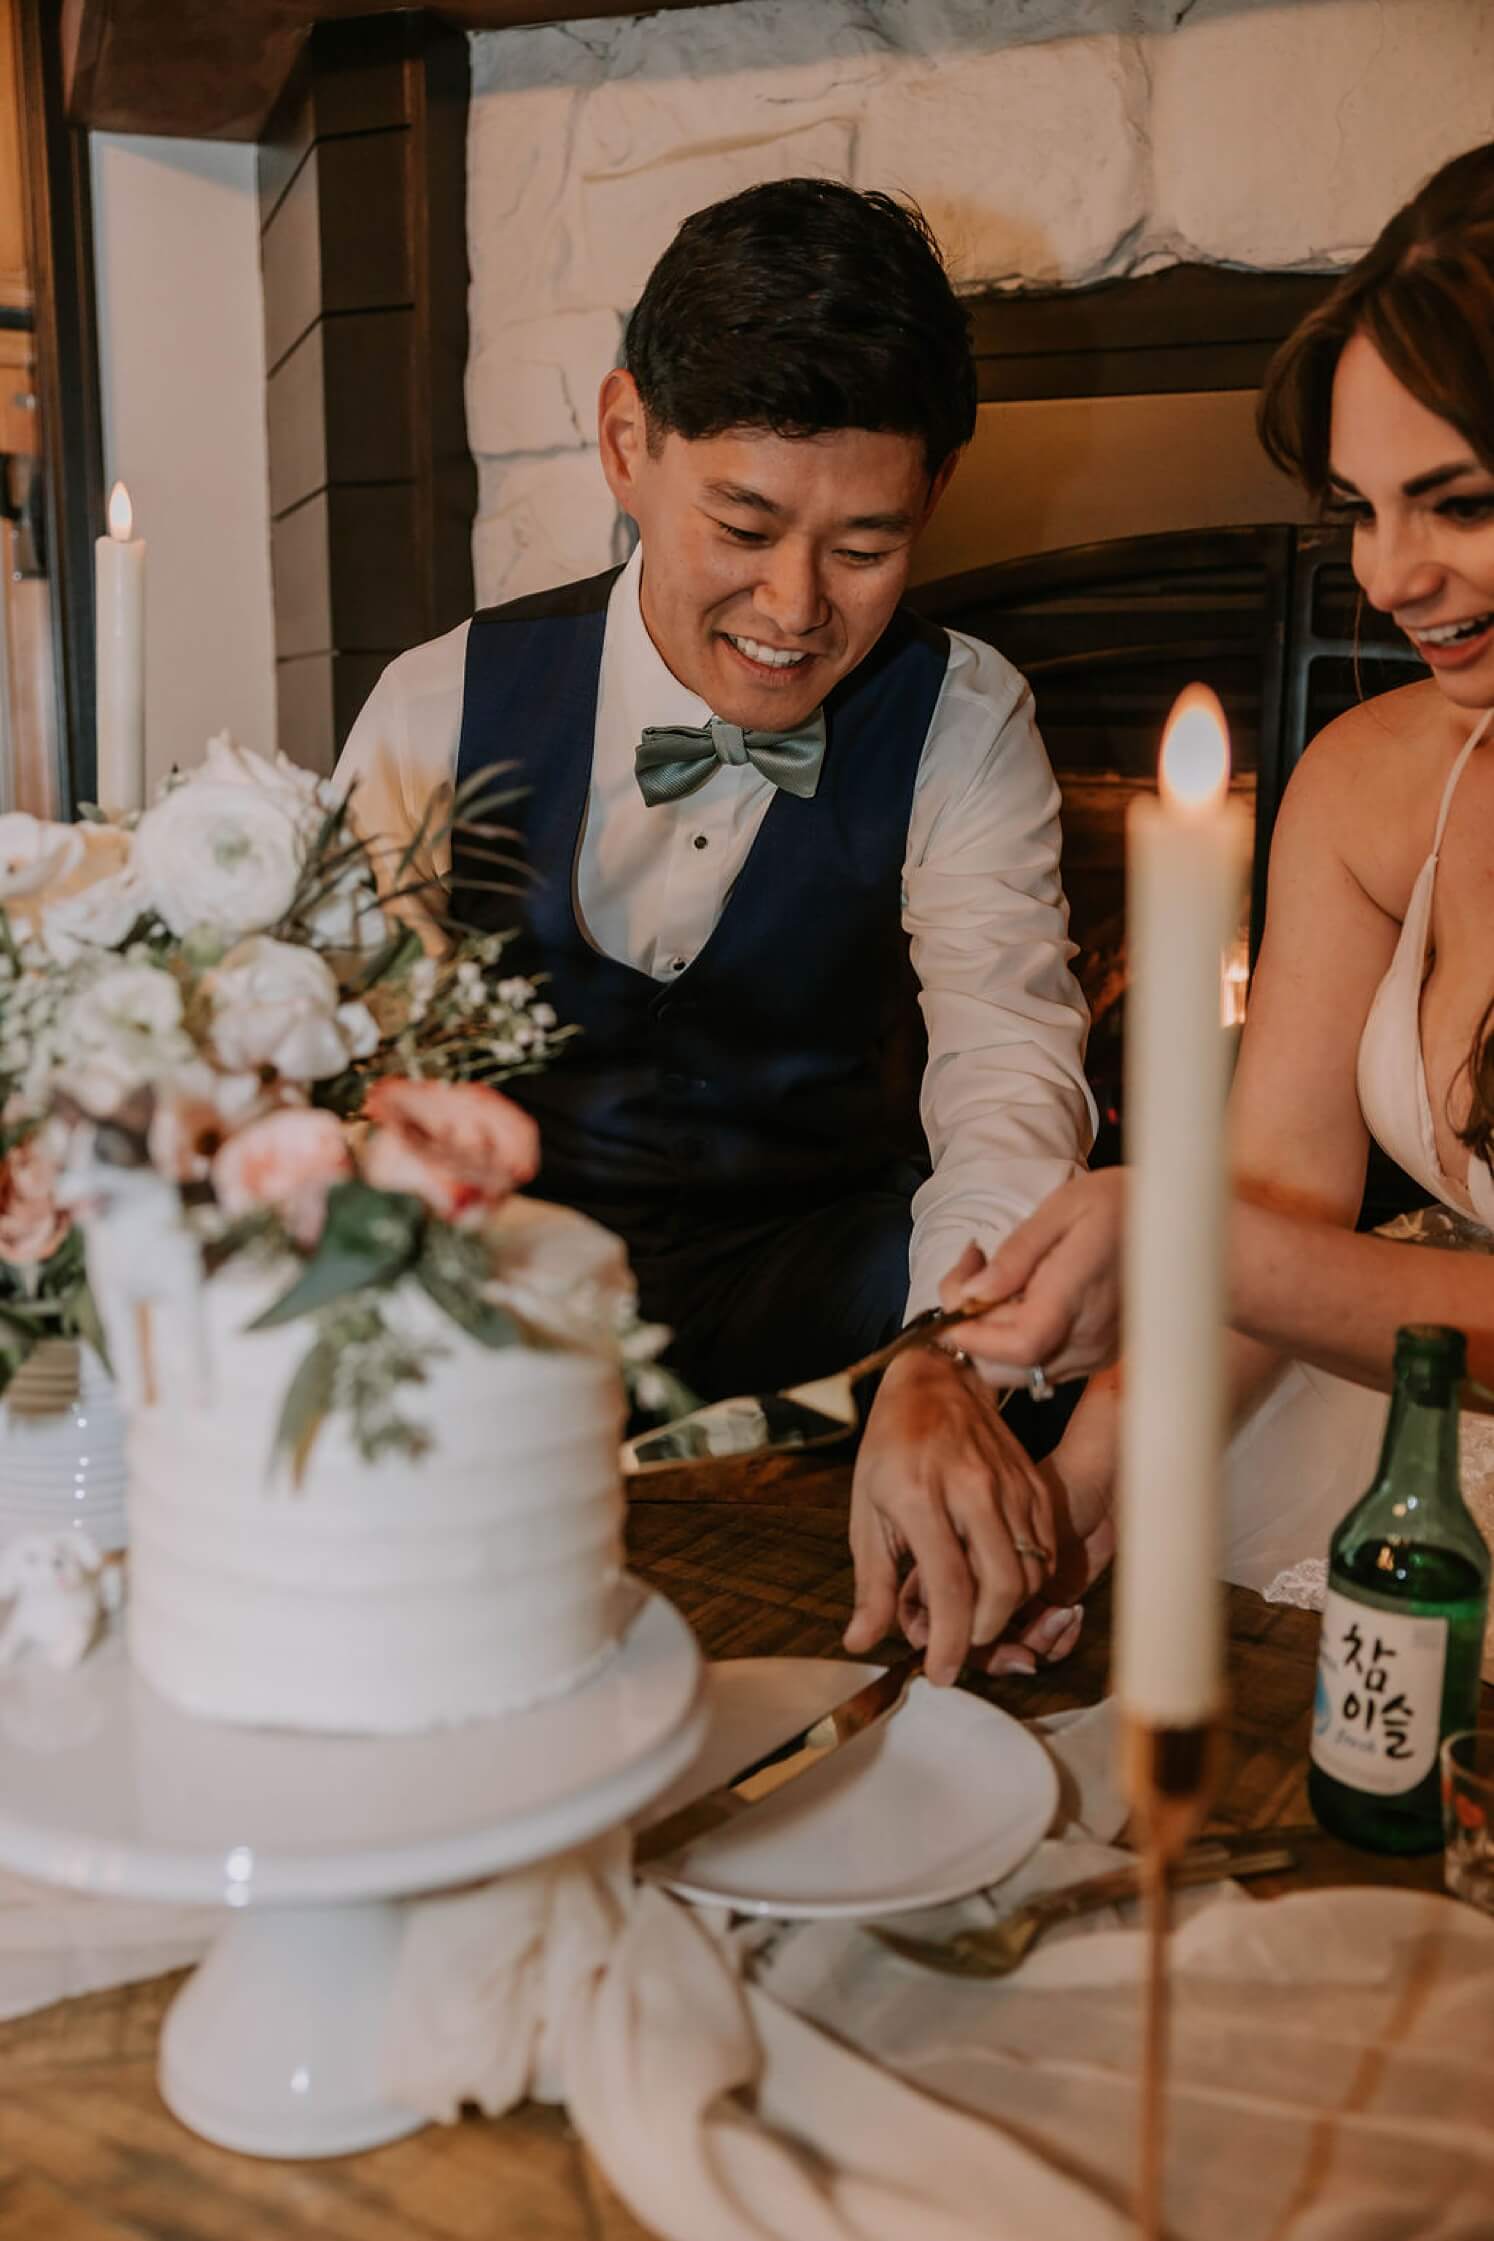 Bride and groom cutting cake at Colorado elopement | McArthur Weddings and Events